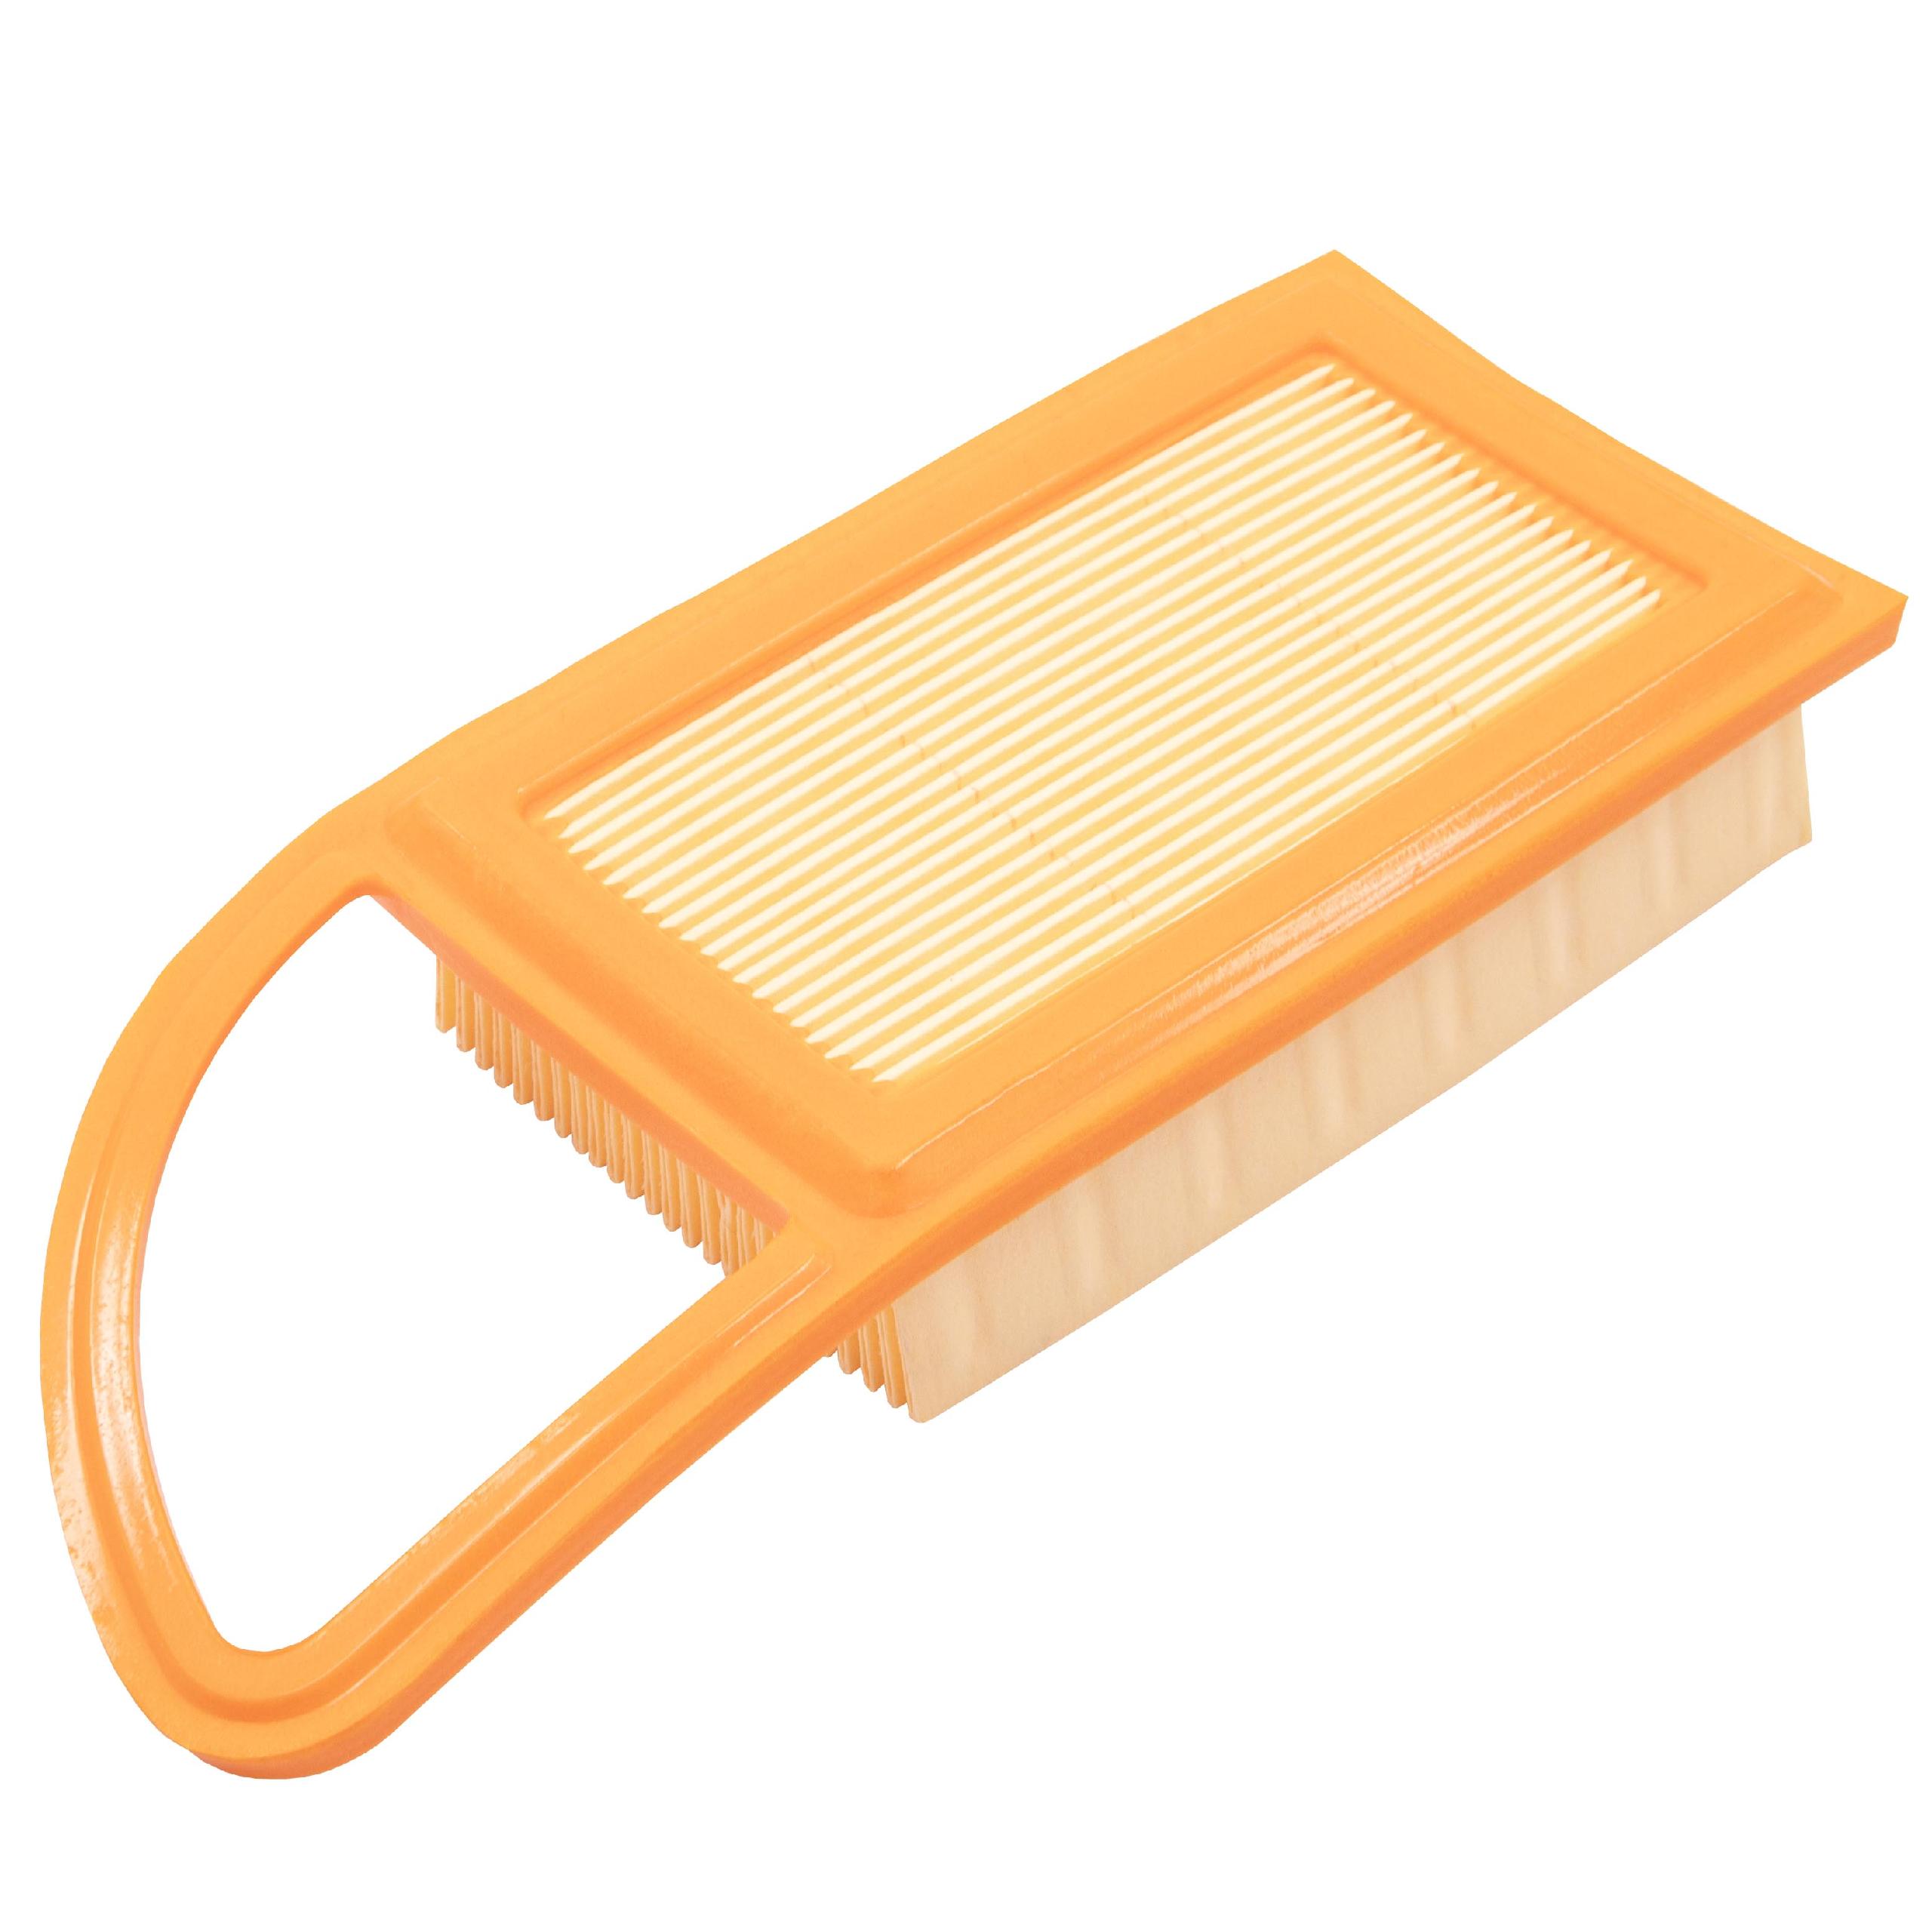  Air Filter as Replacement for Stihl 42821410300, 4238 140 1800, 4282 141 0300, 4282 141 0300B